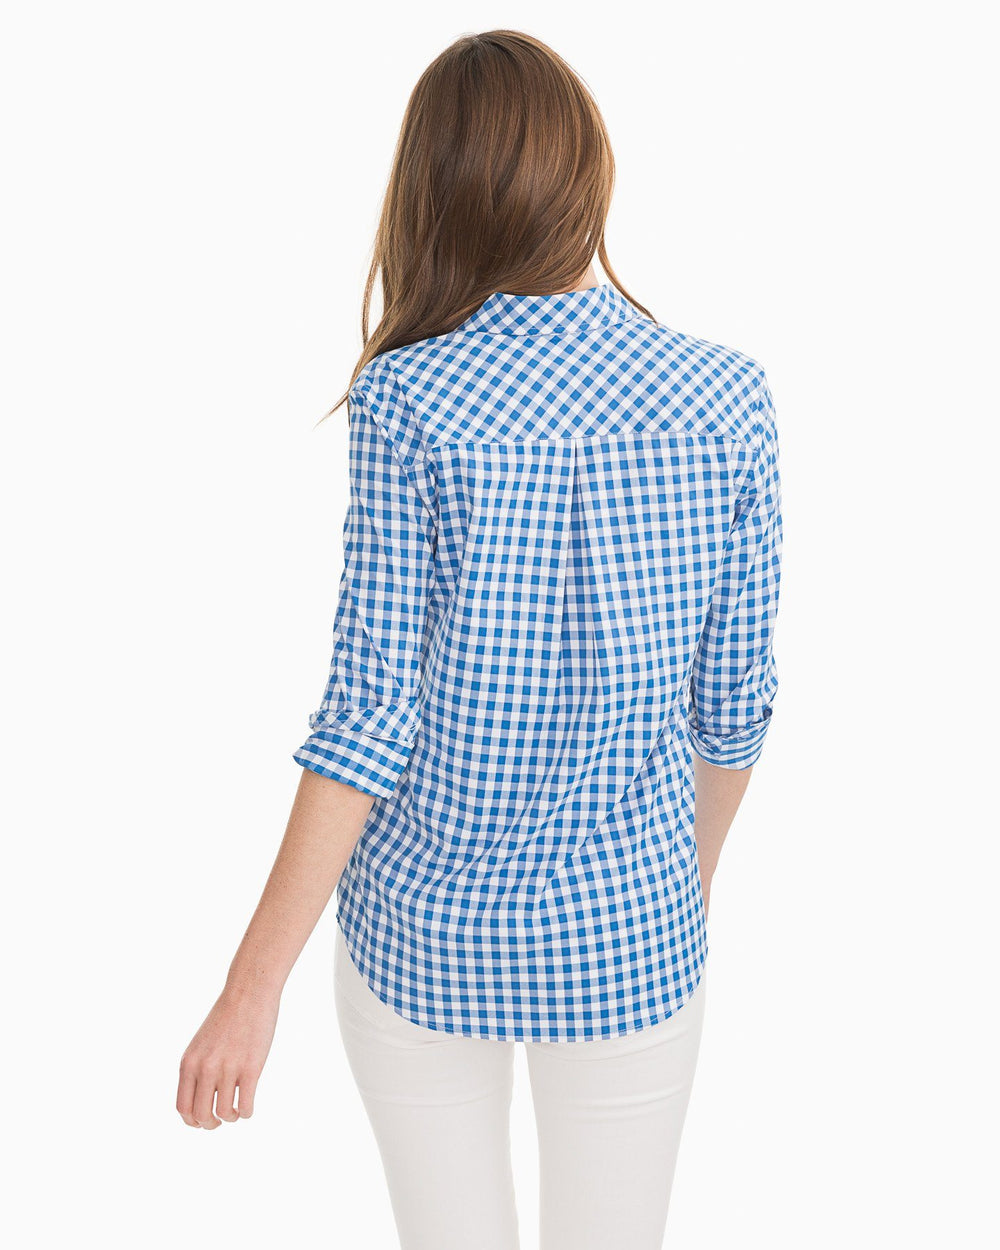 The back view of the Southern Tide Gameday Intercoastal Hadley Popover by Southern Tide - Cobalt Blue